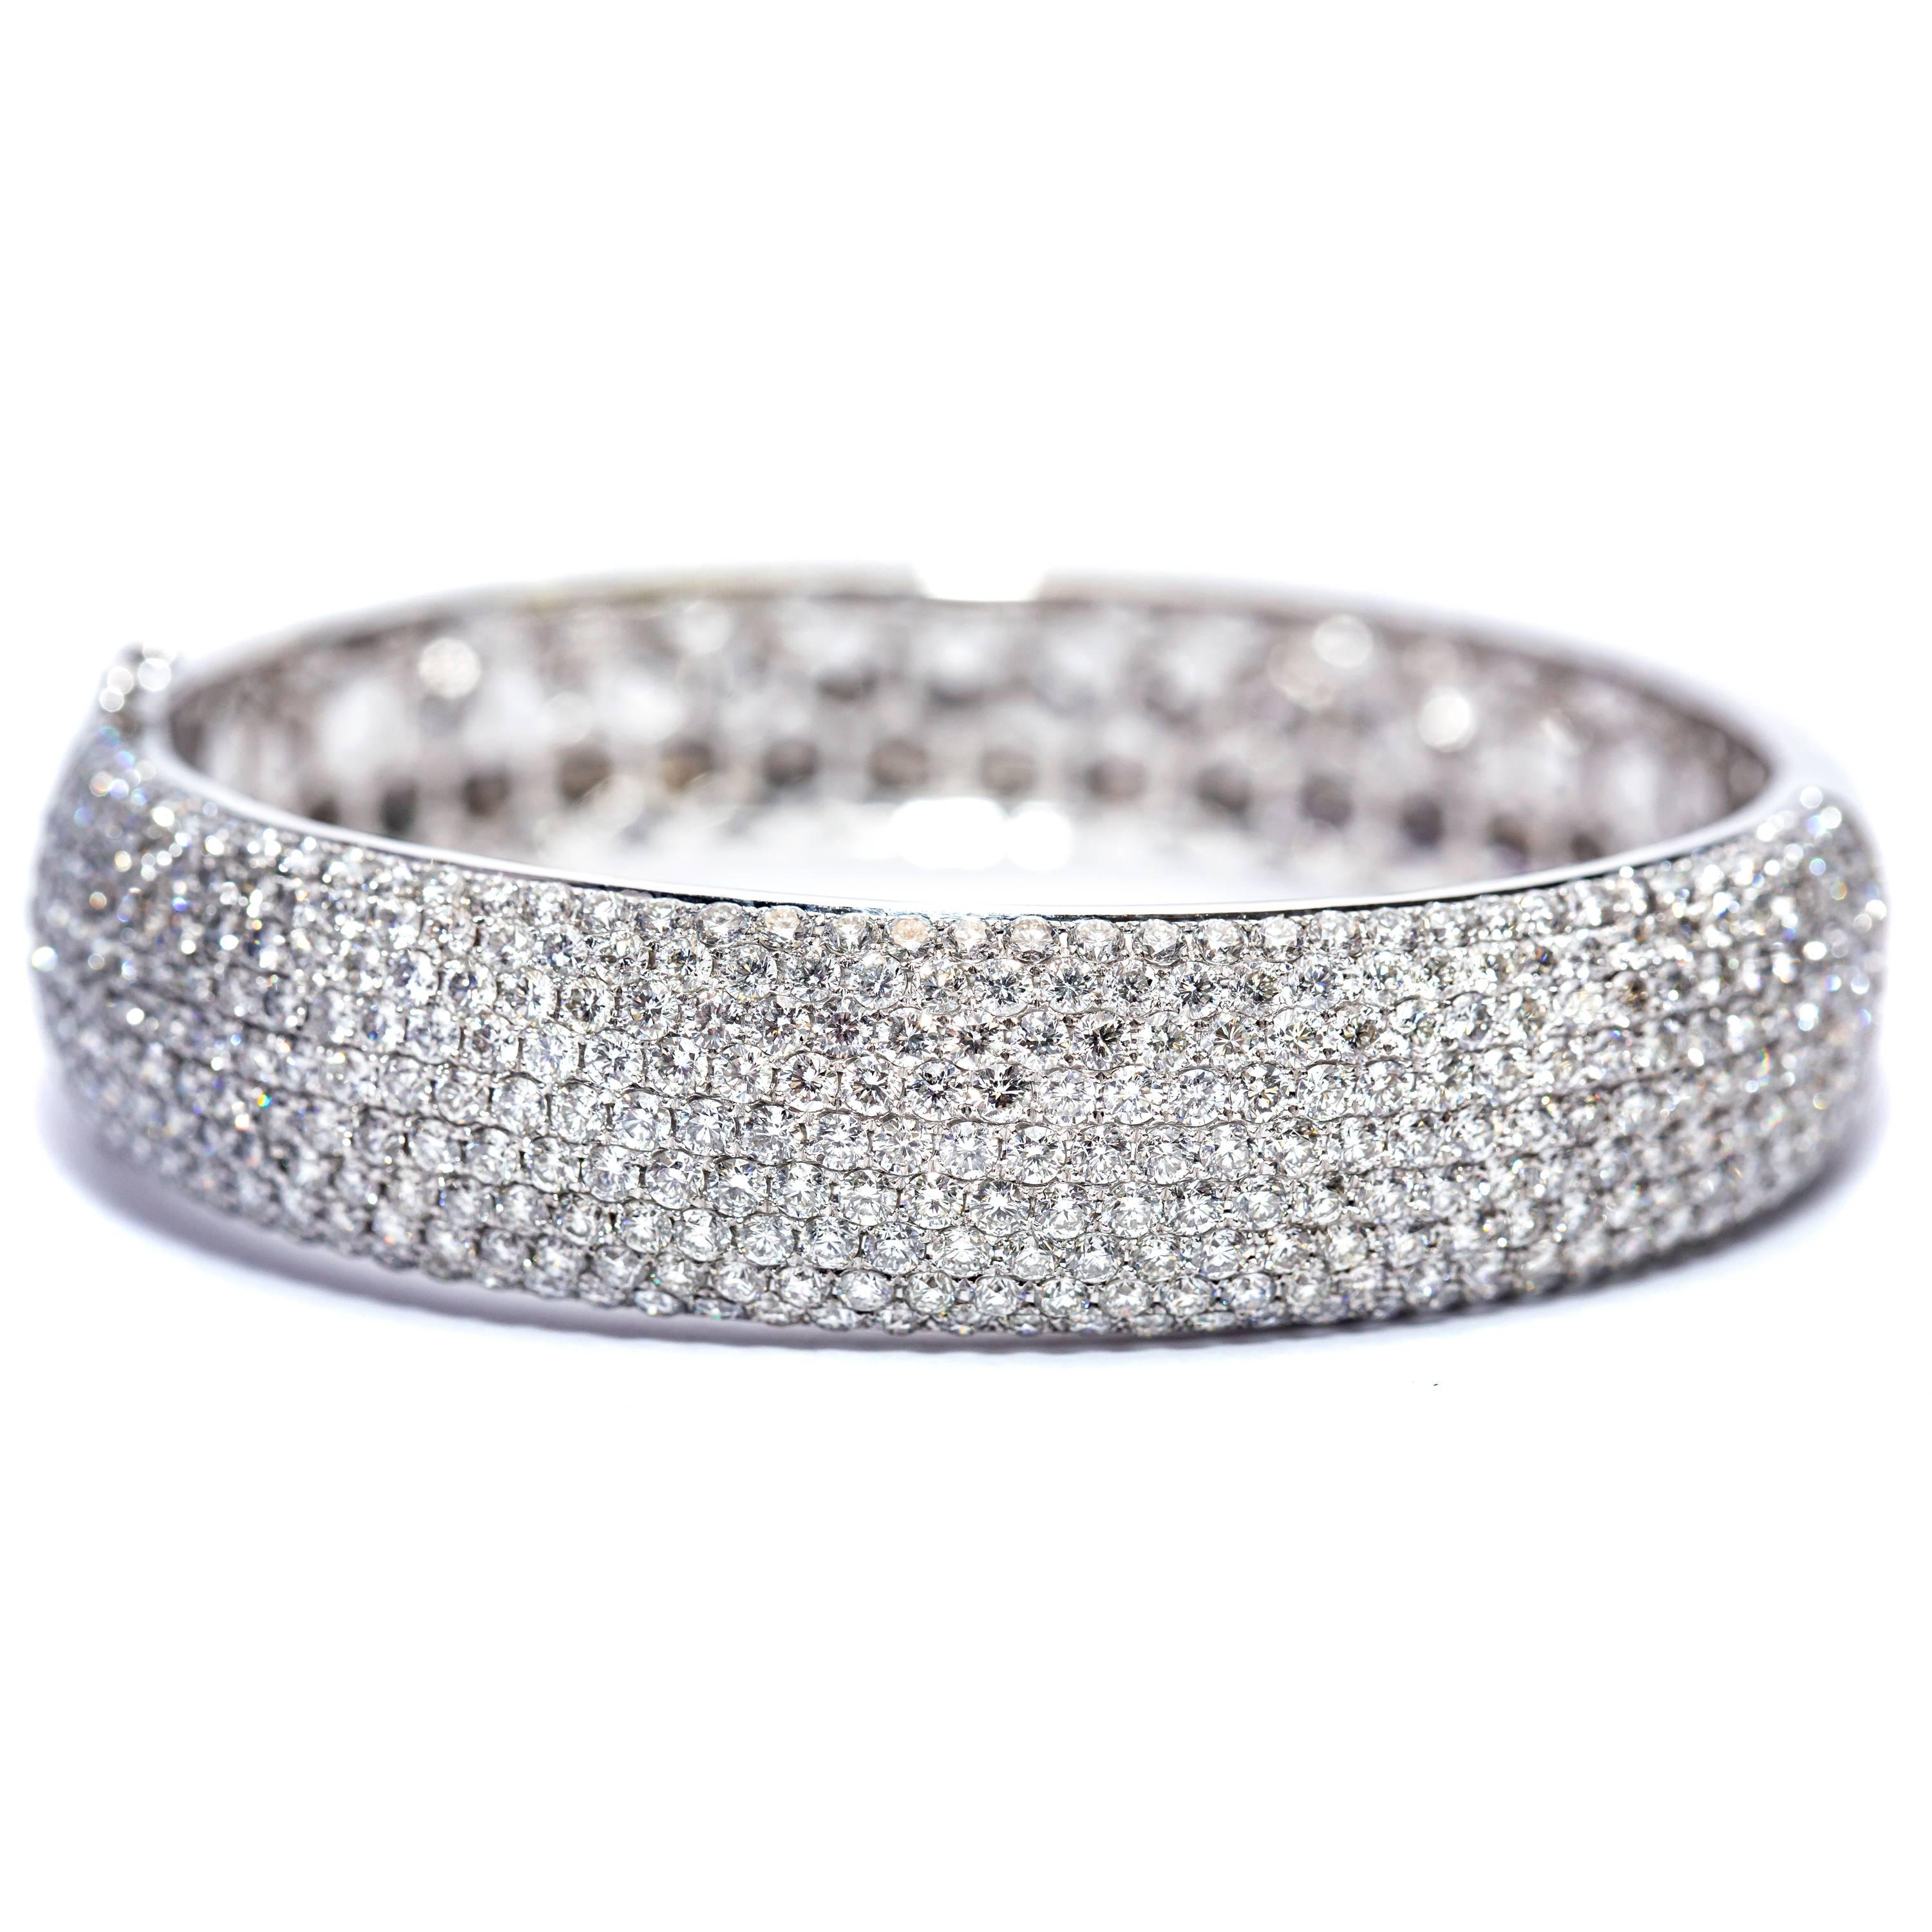 This stunning 12.00 Carat Round Diamond Pave Set Bangle featuring Color G/H Clarity SI1 Round White Diamonds in a pave setting covering half of this beautiful piece, hand crafted honeycomb filigree design on the inside of the bangle and highly